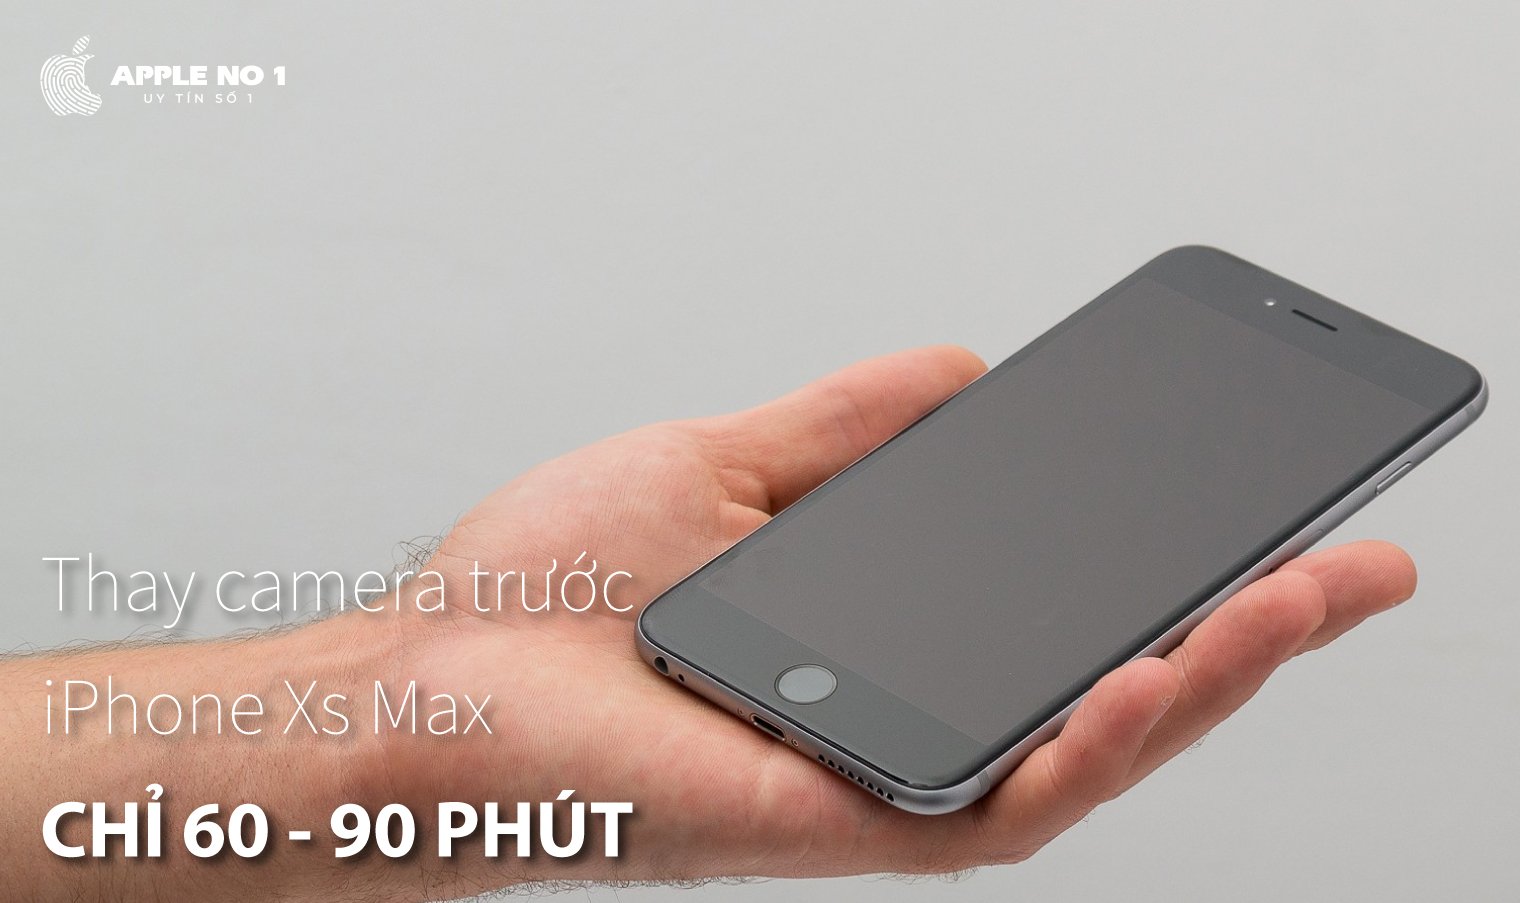 thay camera truoc iphone 6 plus co nhanh khong?